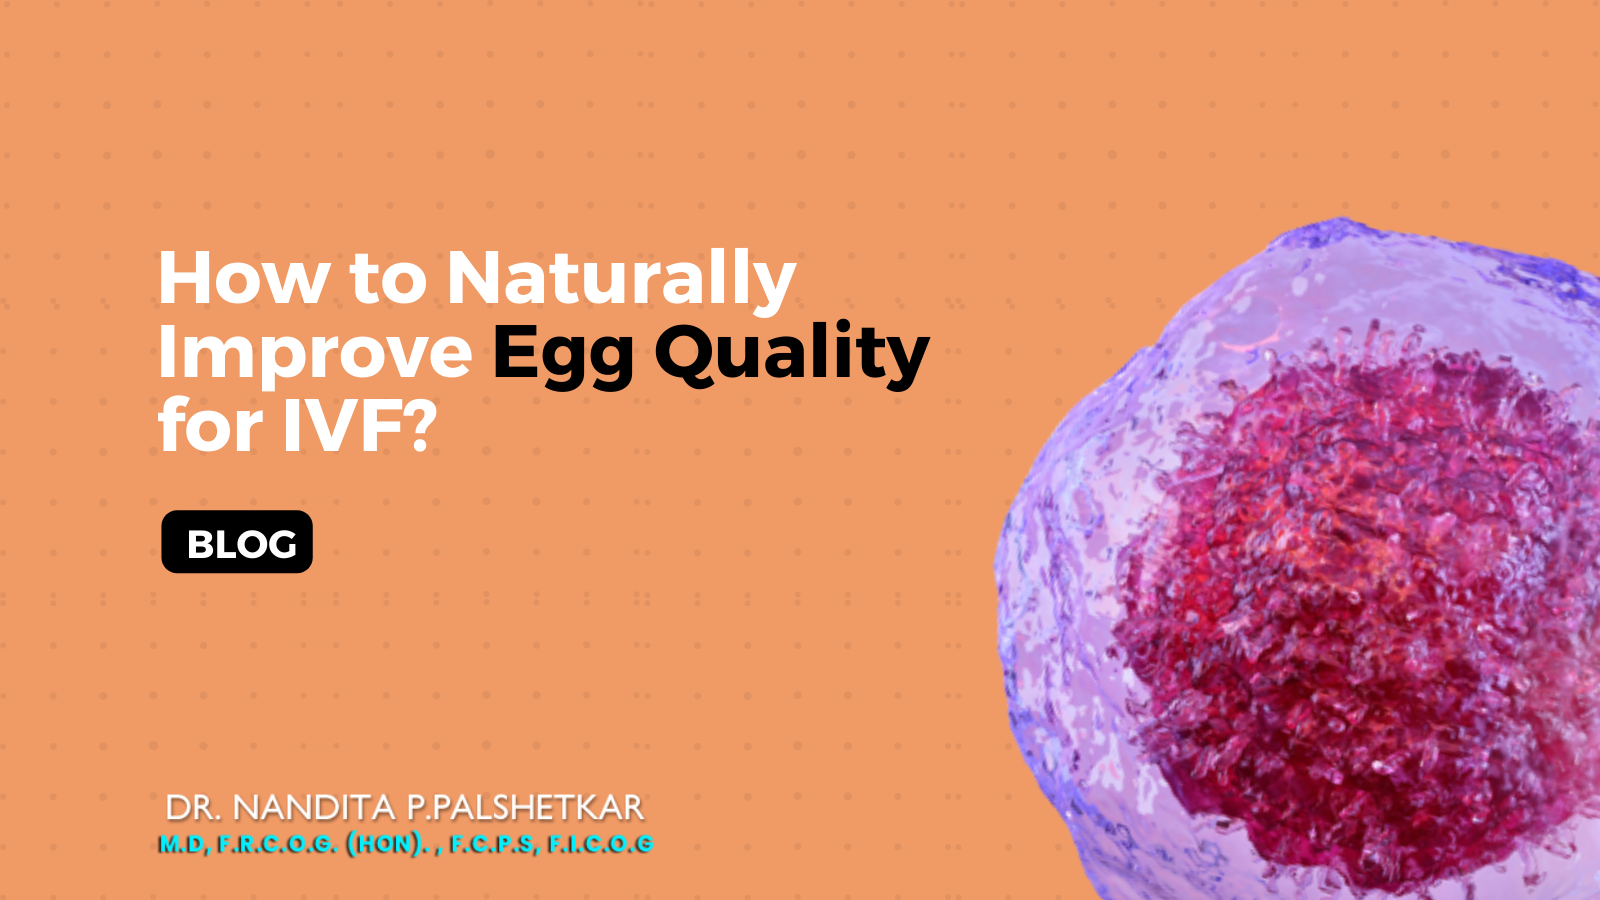 How to Naturally Improve Egg Quality for IVF?